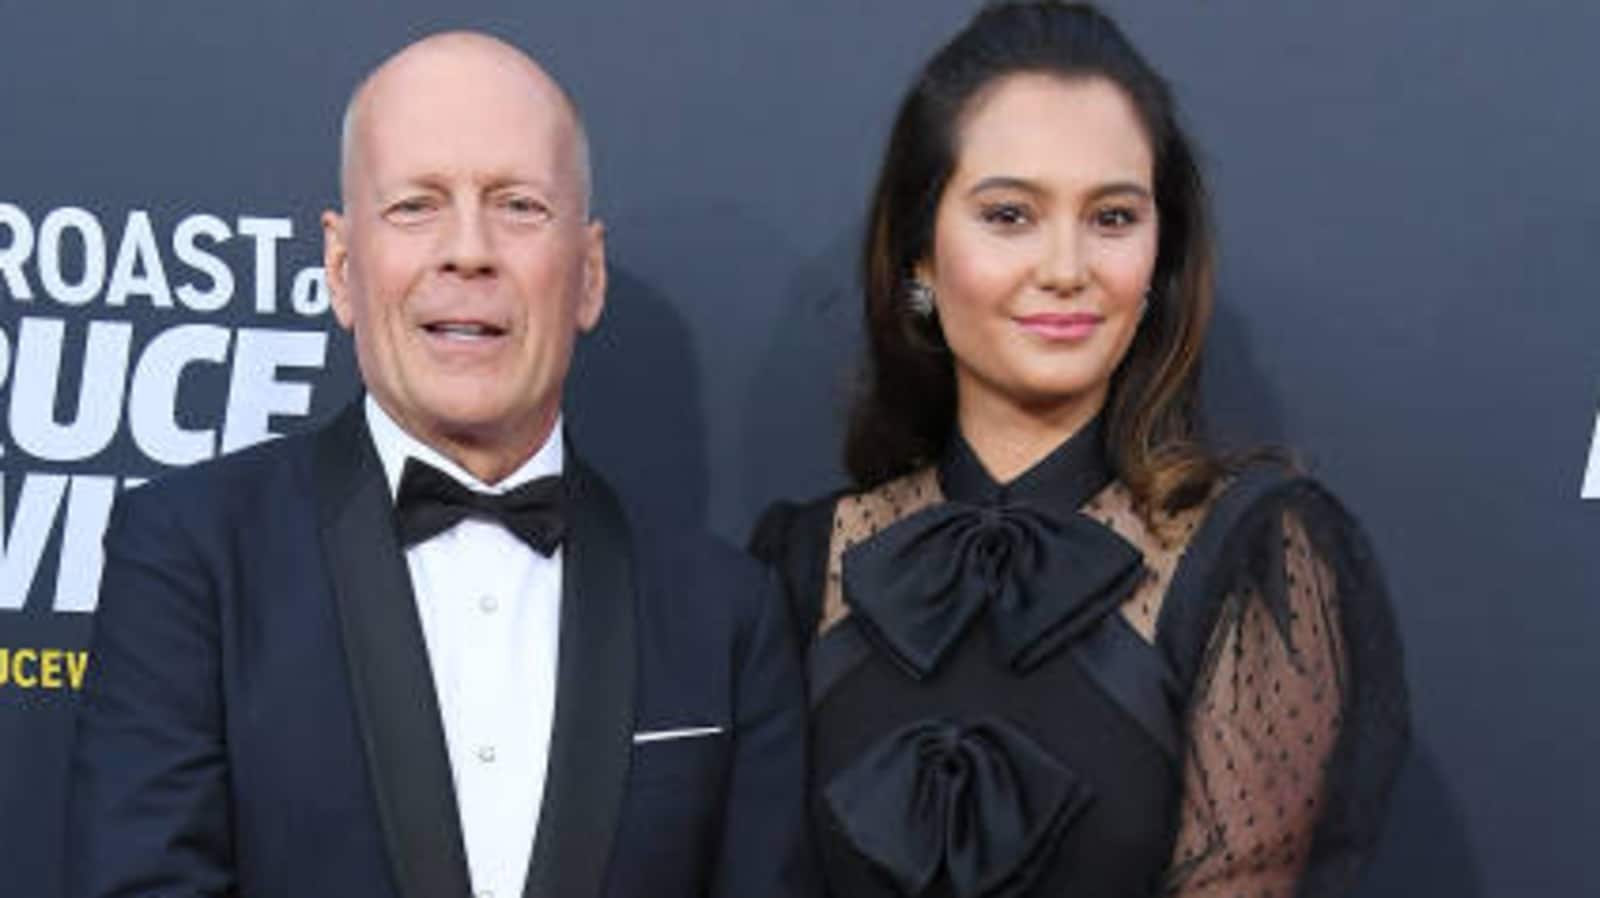 Watch: Bruce Willis’ wife Emma Heming Willis opens up on dealing with the actor’s ‘dementia’ and her care partner role